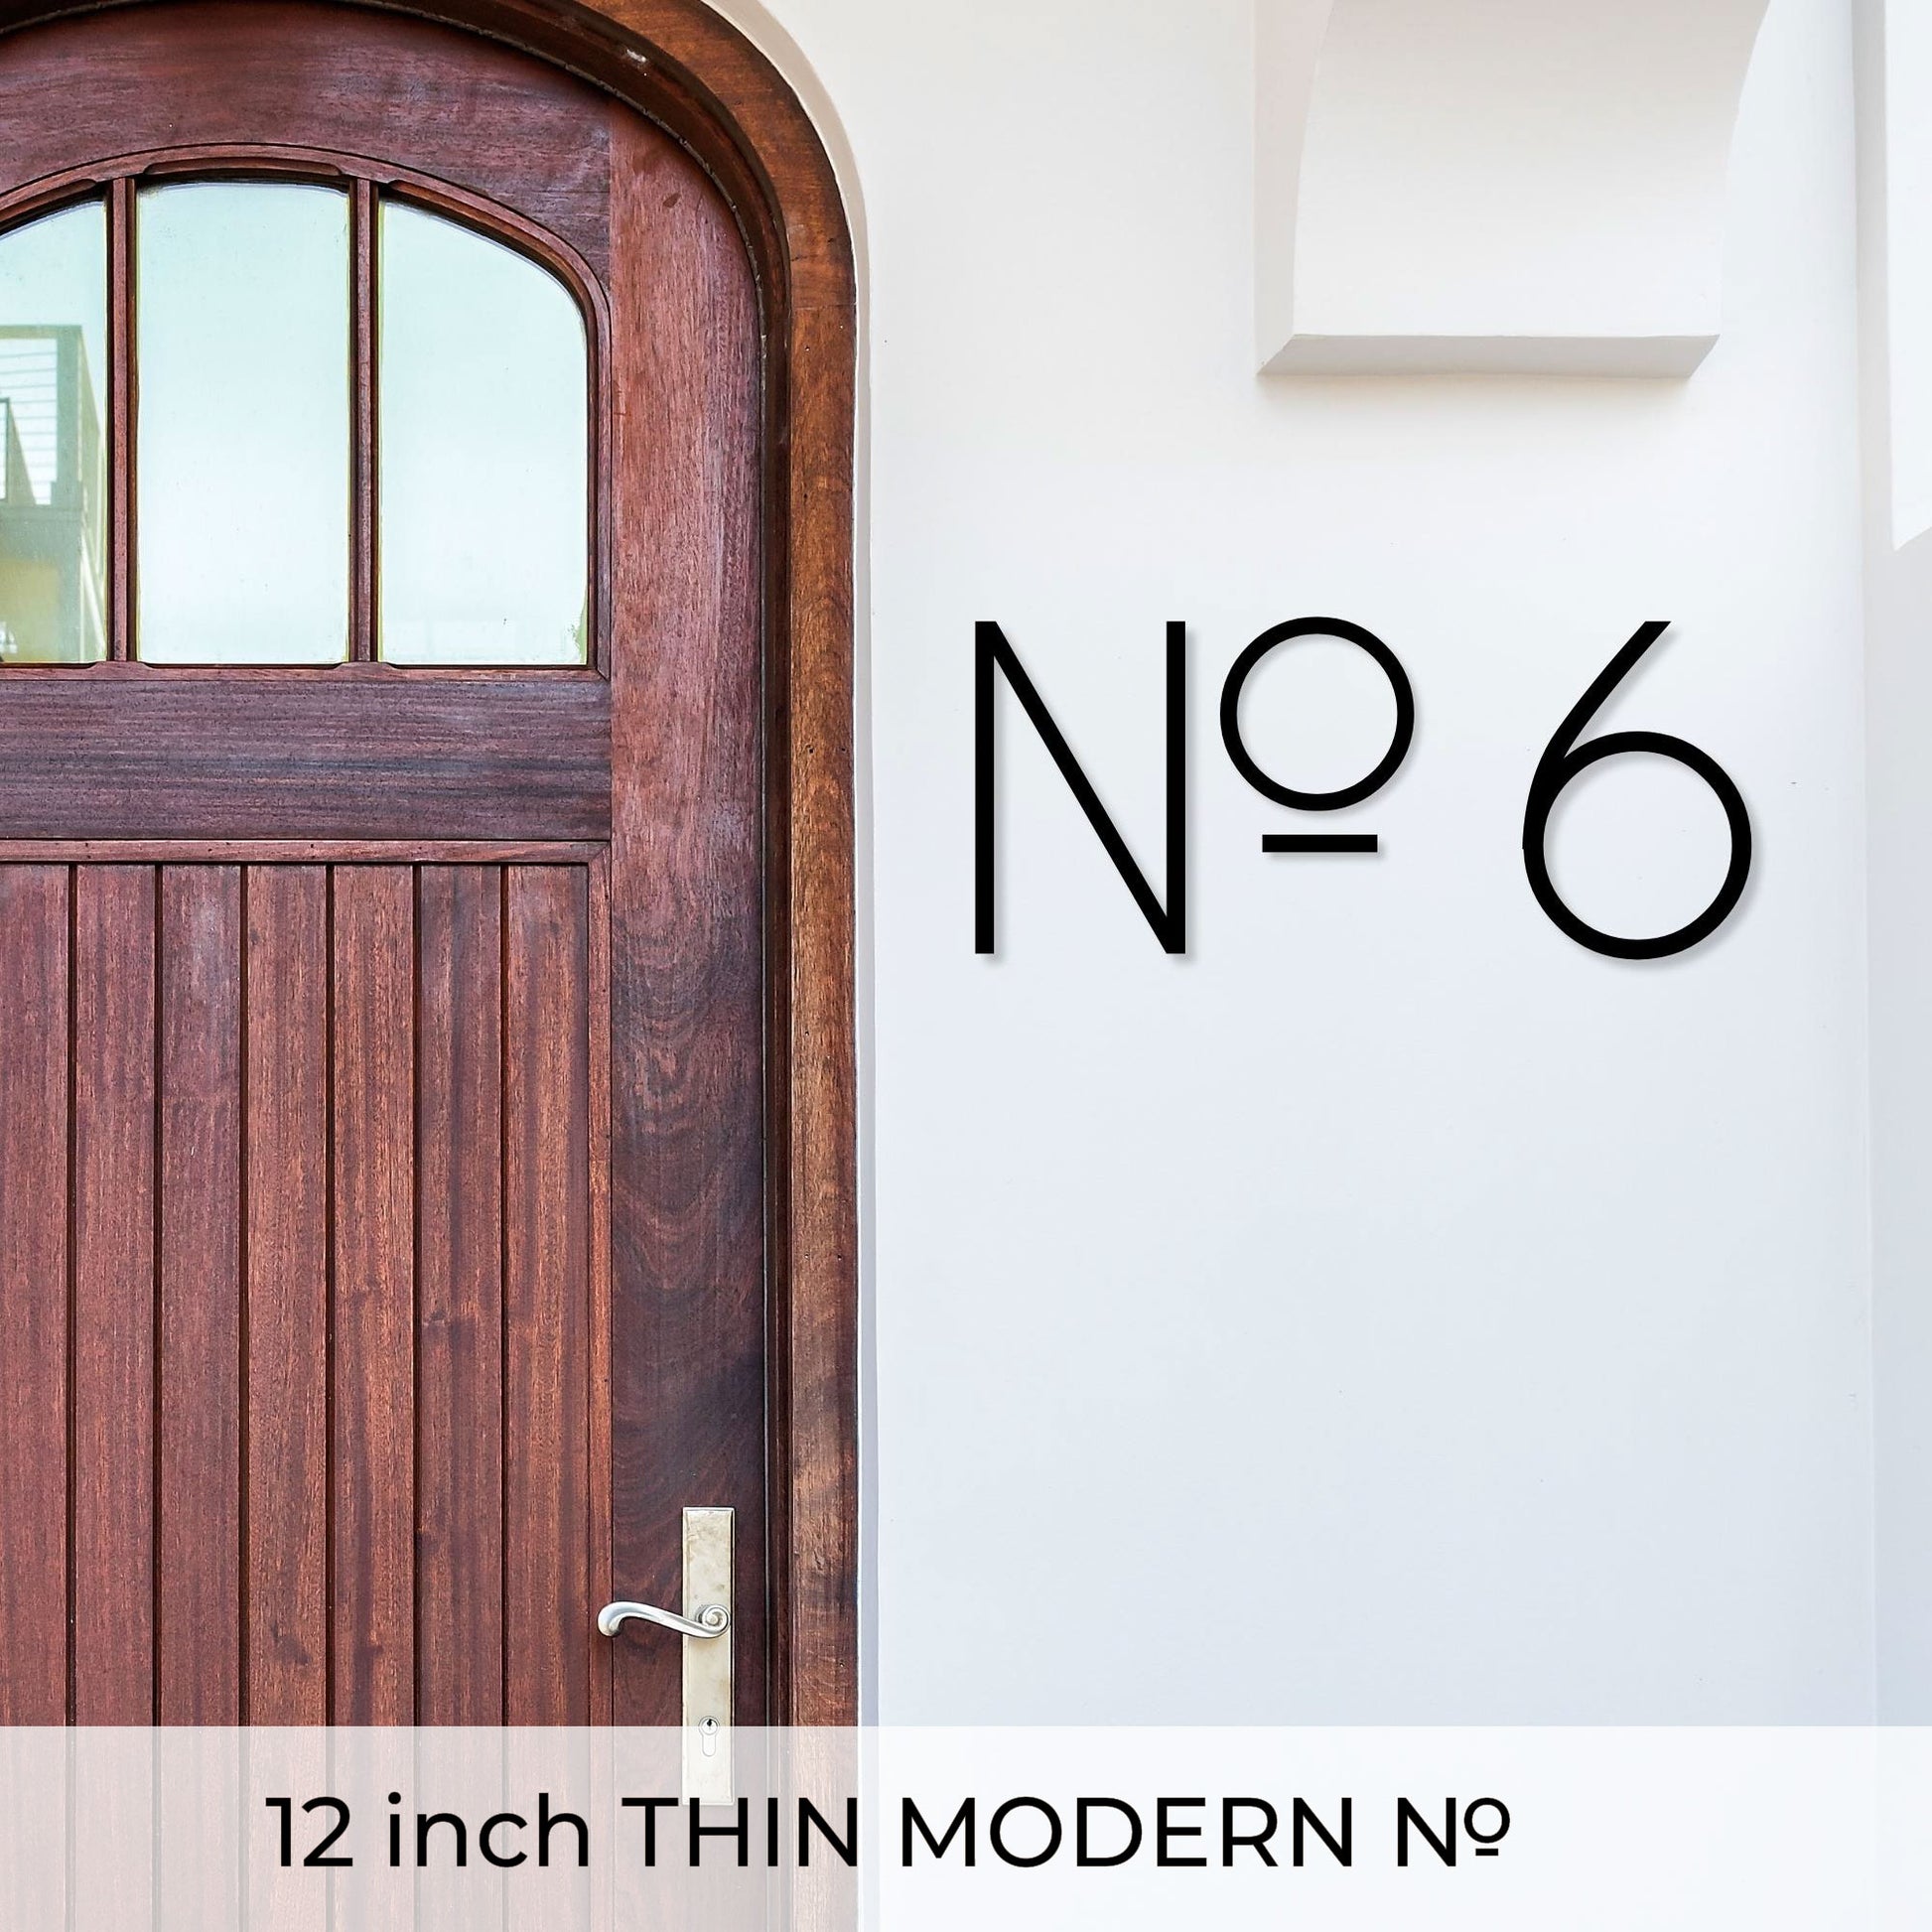 black THIN MODERN house numbers and No letters